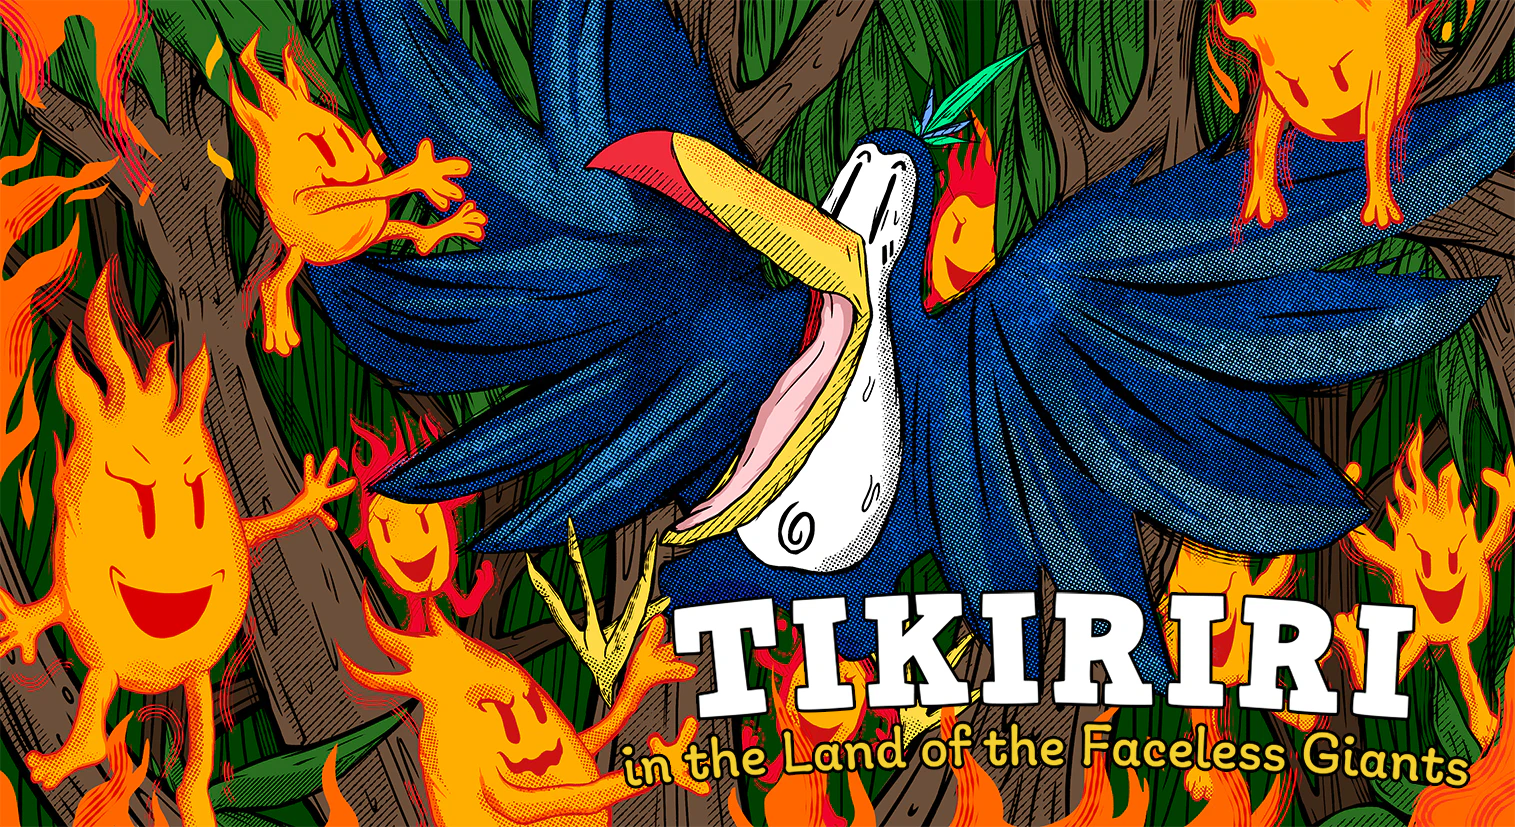 Tikiriri in the Land of Faceless Giants - a picture book enhanced with augmented reality 